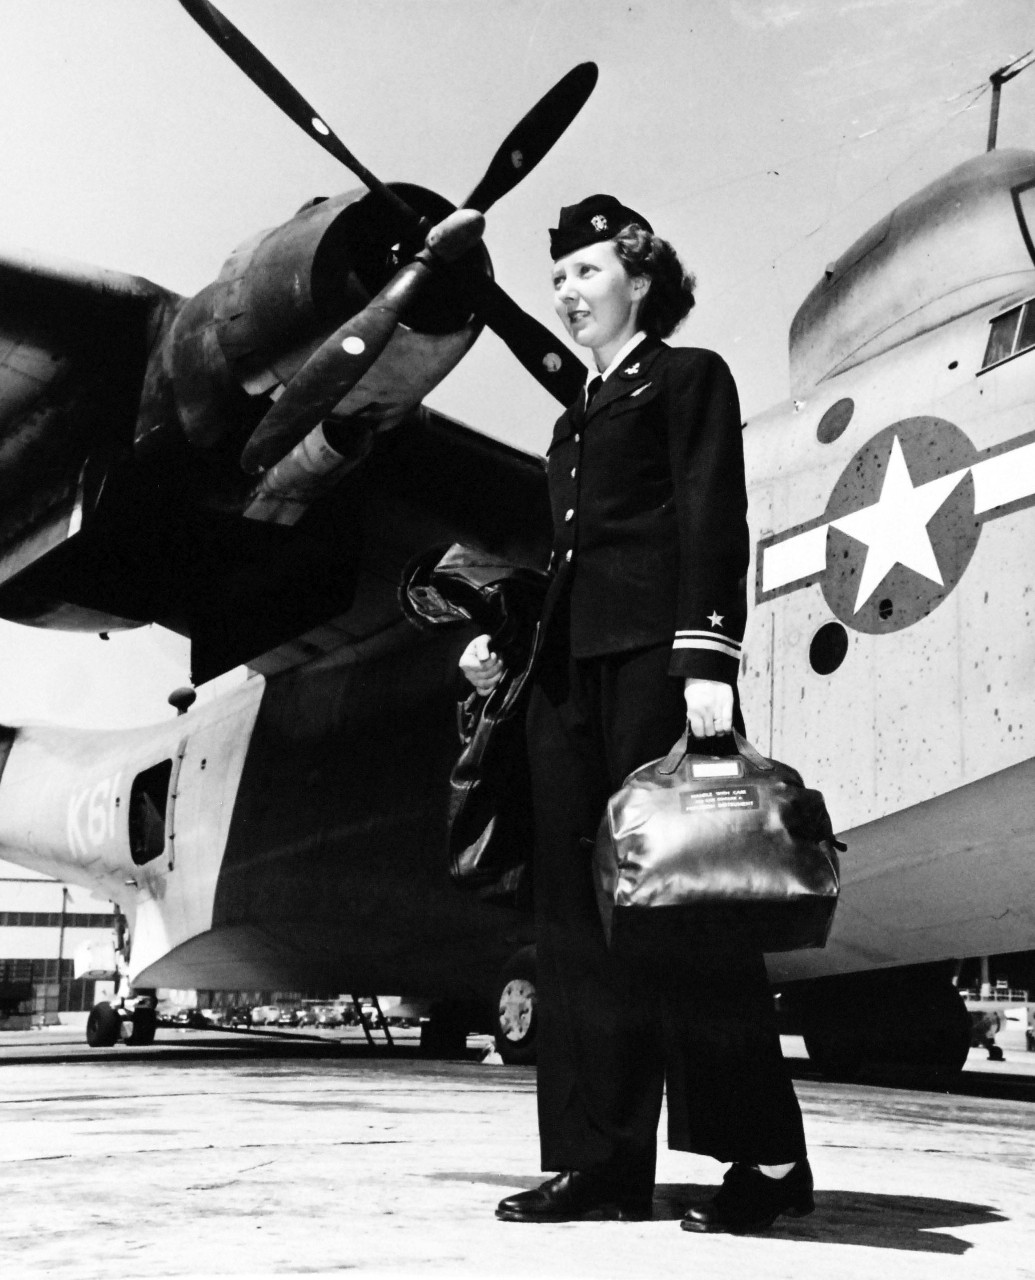 80-G-49793: Service Dress Blue, April 1945.   Lieutenant Junior Grade Kathleen K. Ballard, Naval air navigator, walks to her plane at the Naval Air Station, Alameda, California.  With her, she carriers her flight clothing and in the bag is a sextant which she will use in flight to obtain “fixes”.  Plane in the background is a PBM.   Received April 7, 1945.   Official U.S. Navy photograph, now in the collections of the National Archives.